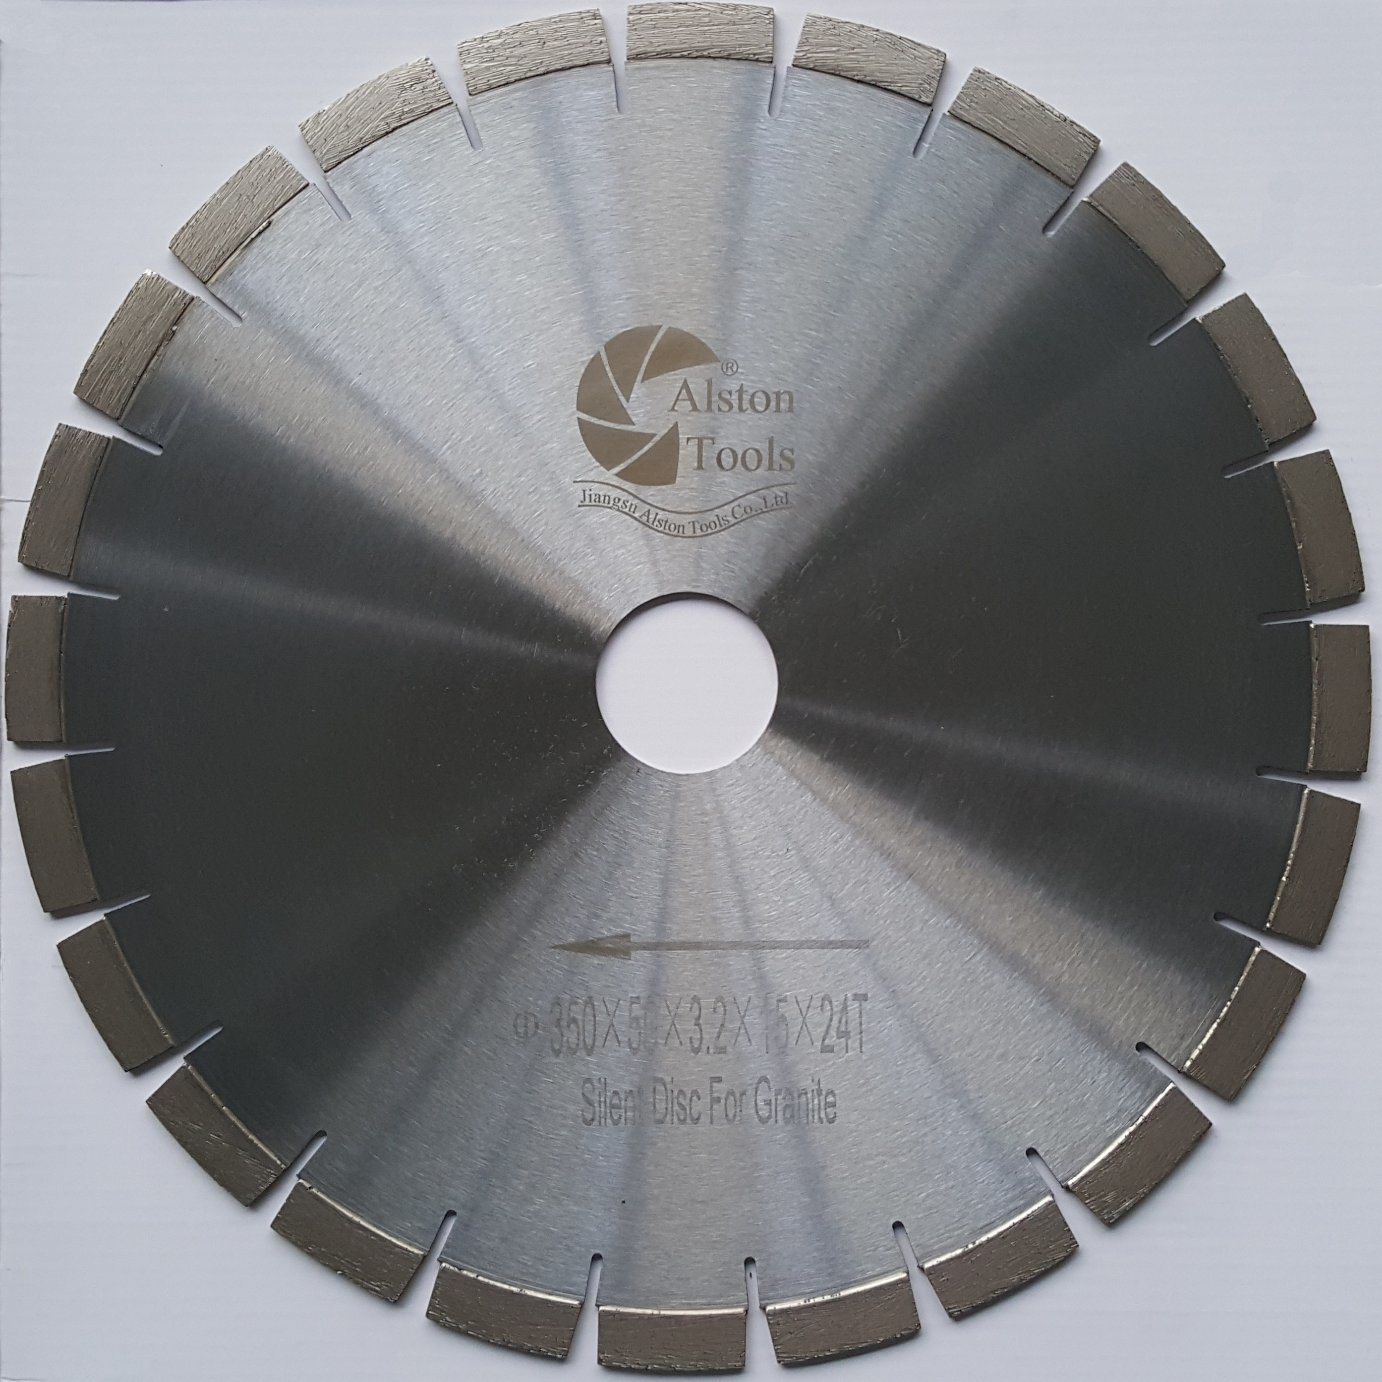 Silent Saw Blades for Granite or Marble, Diamond Blade,